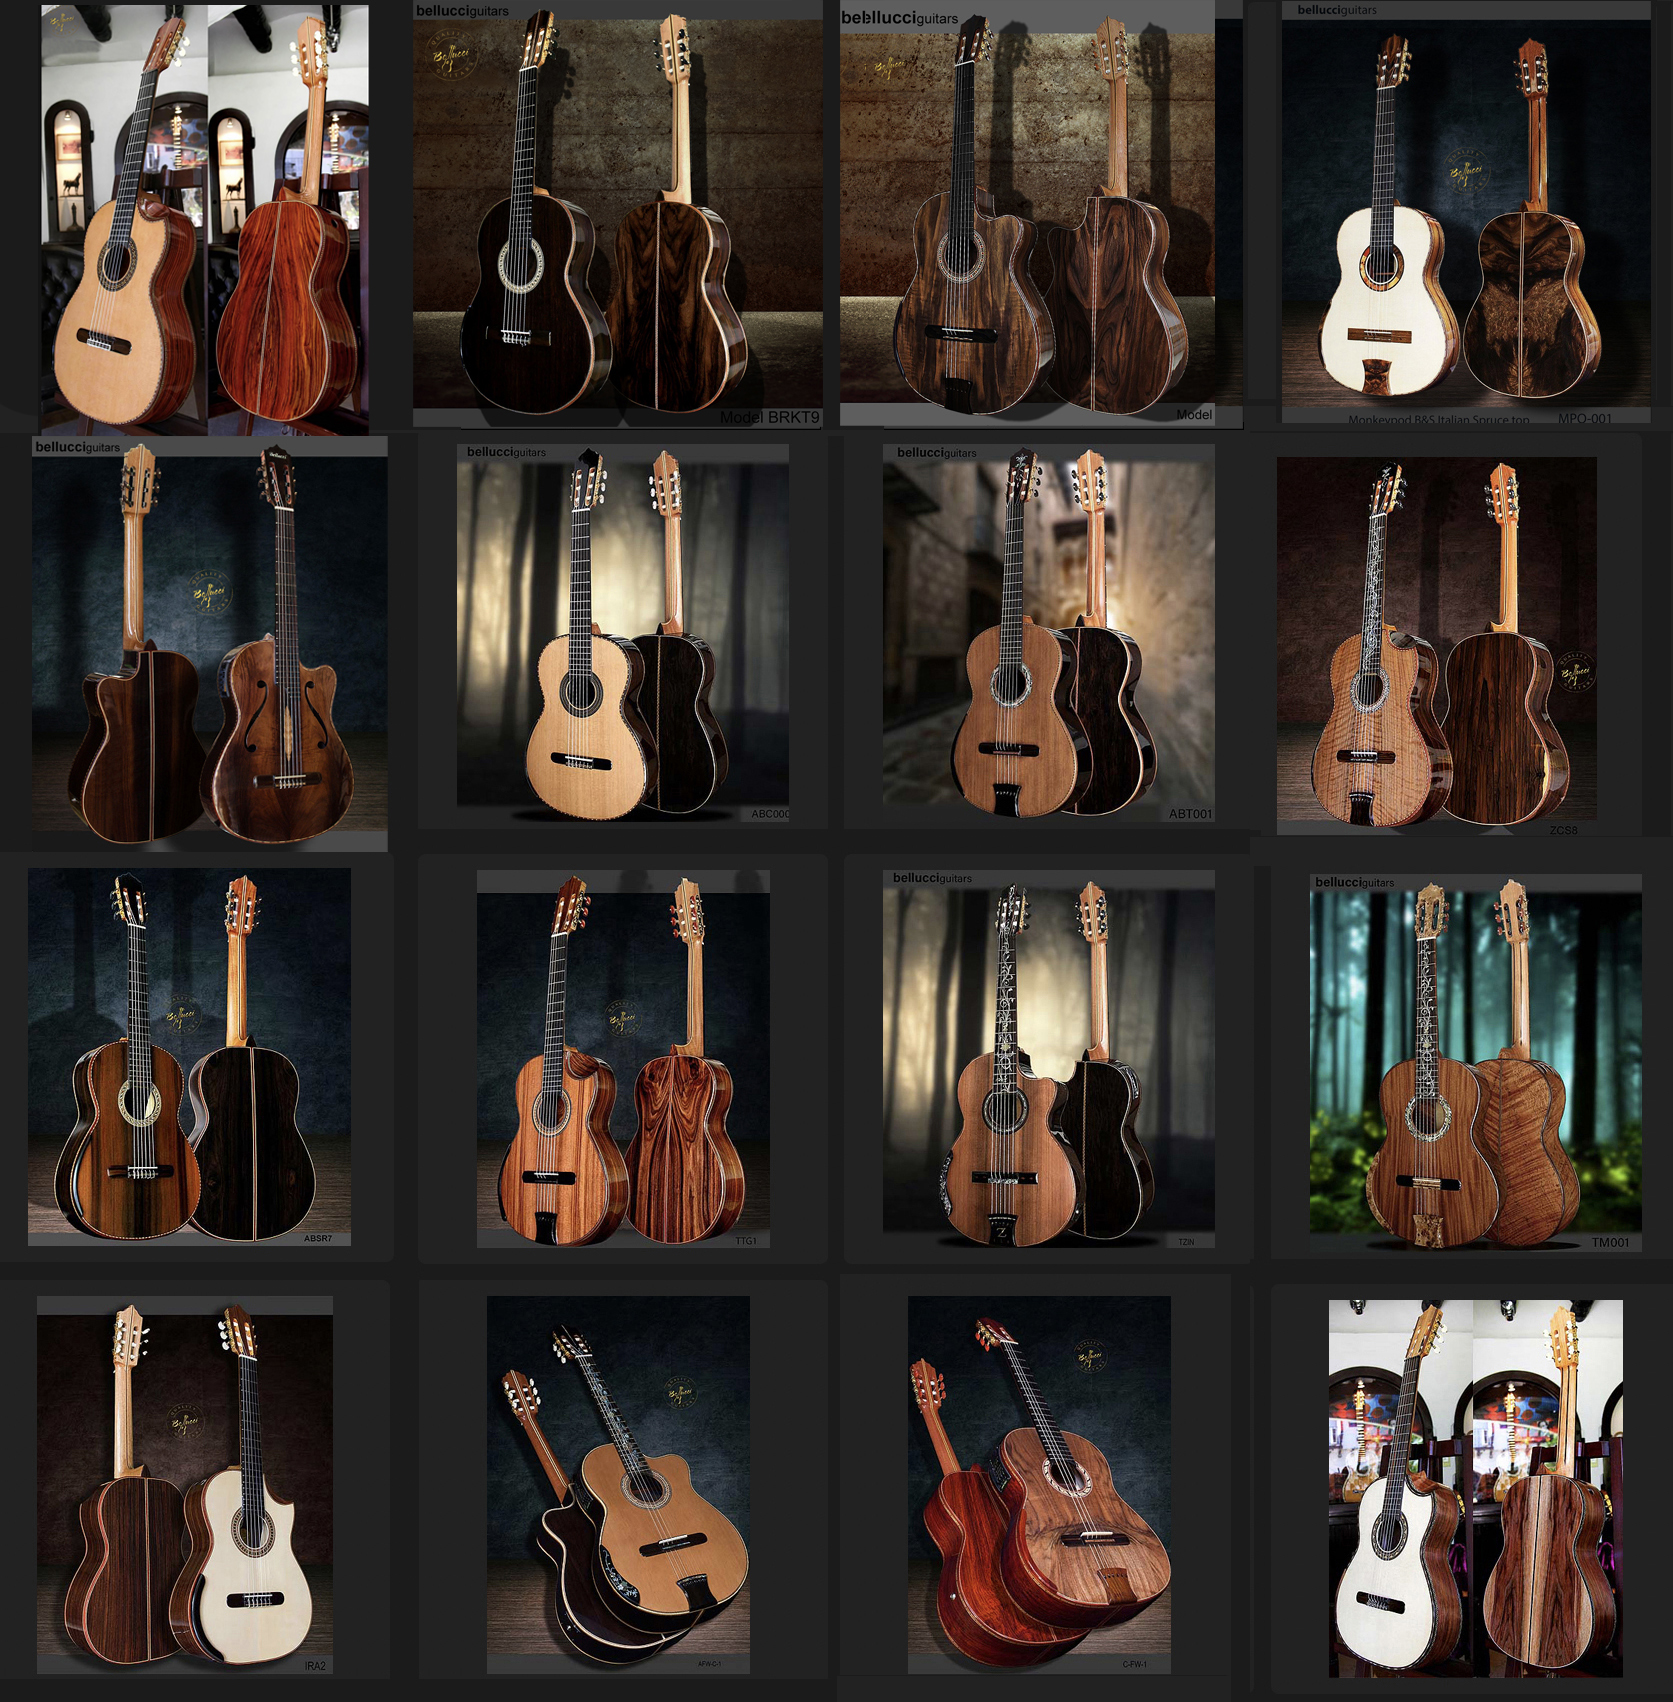 Amazing Bellucci Guitars Collection